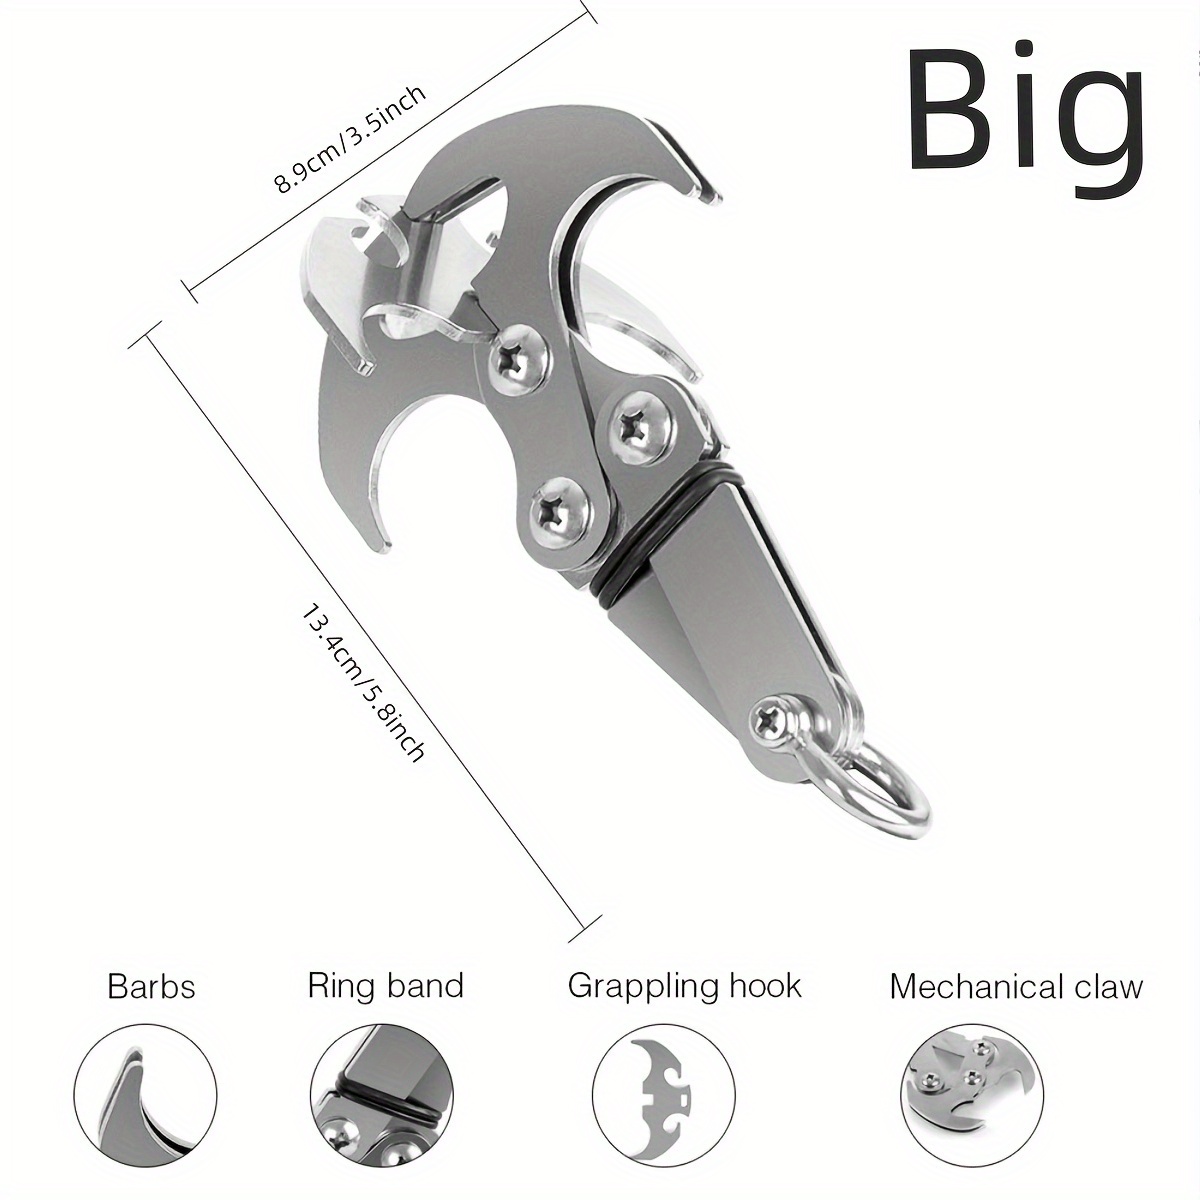 Stainless Steel Survival Folding Grappling Hook Outdoor Climbing